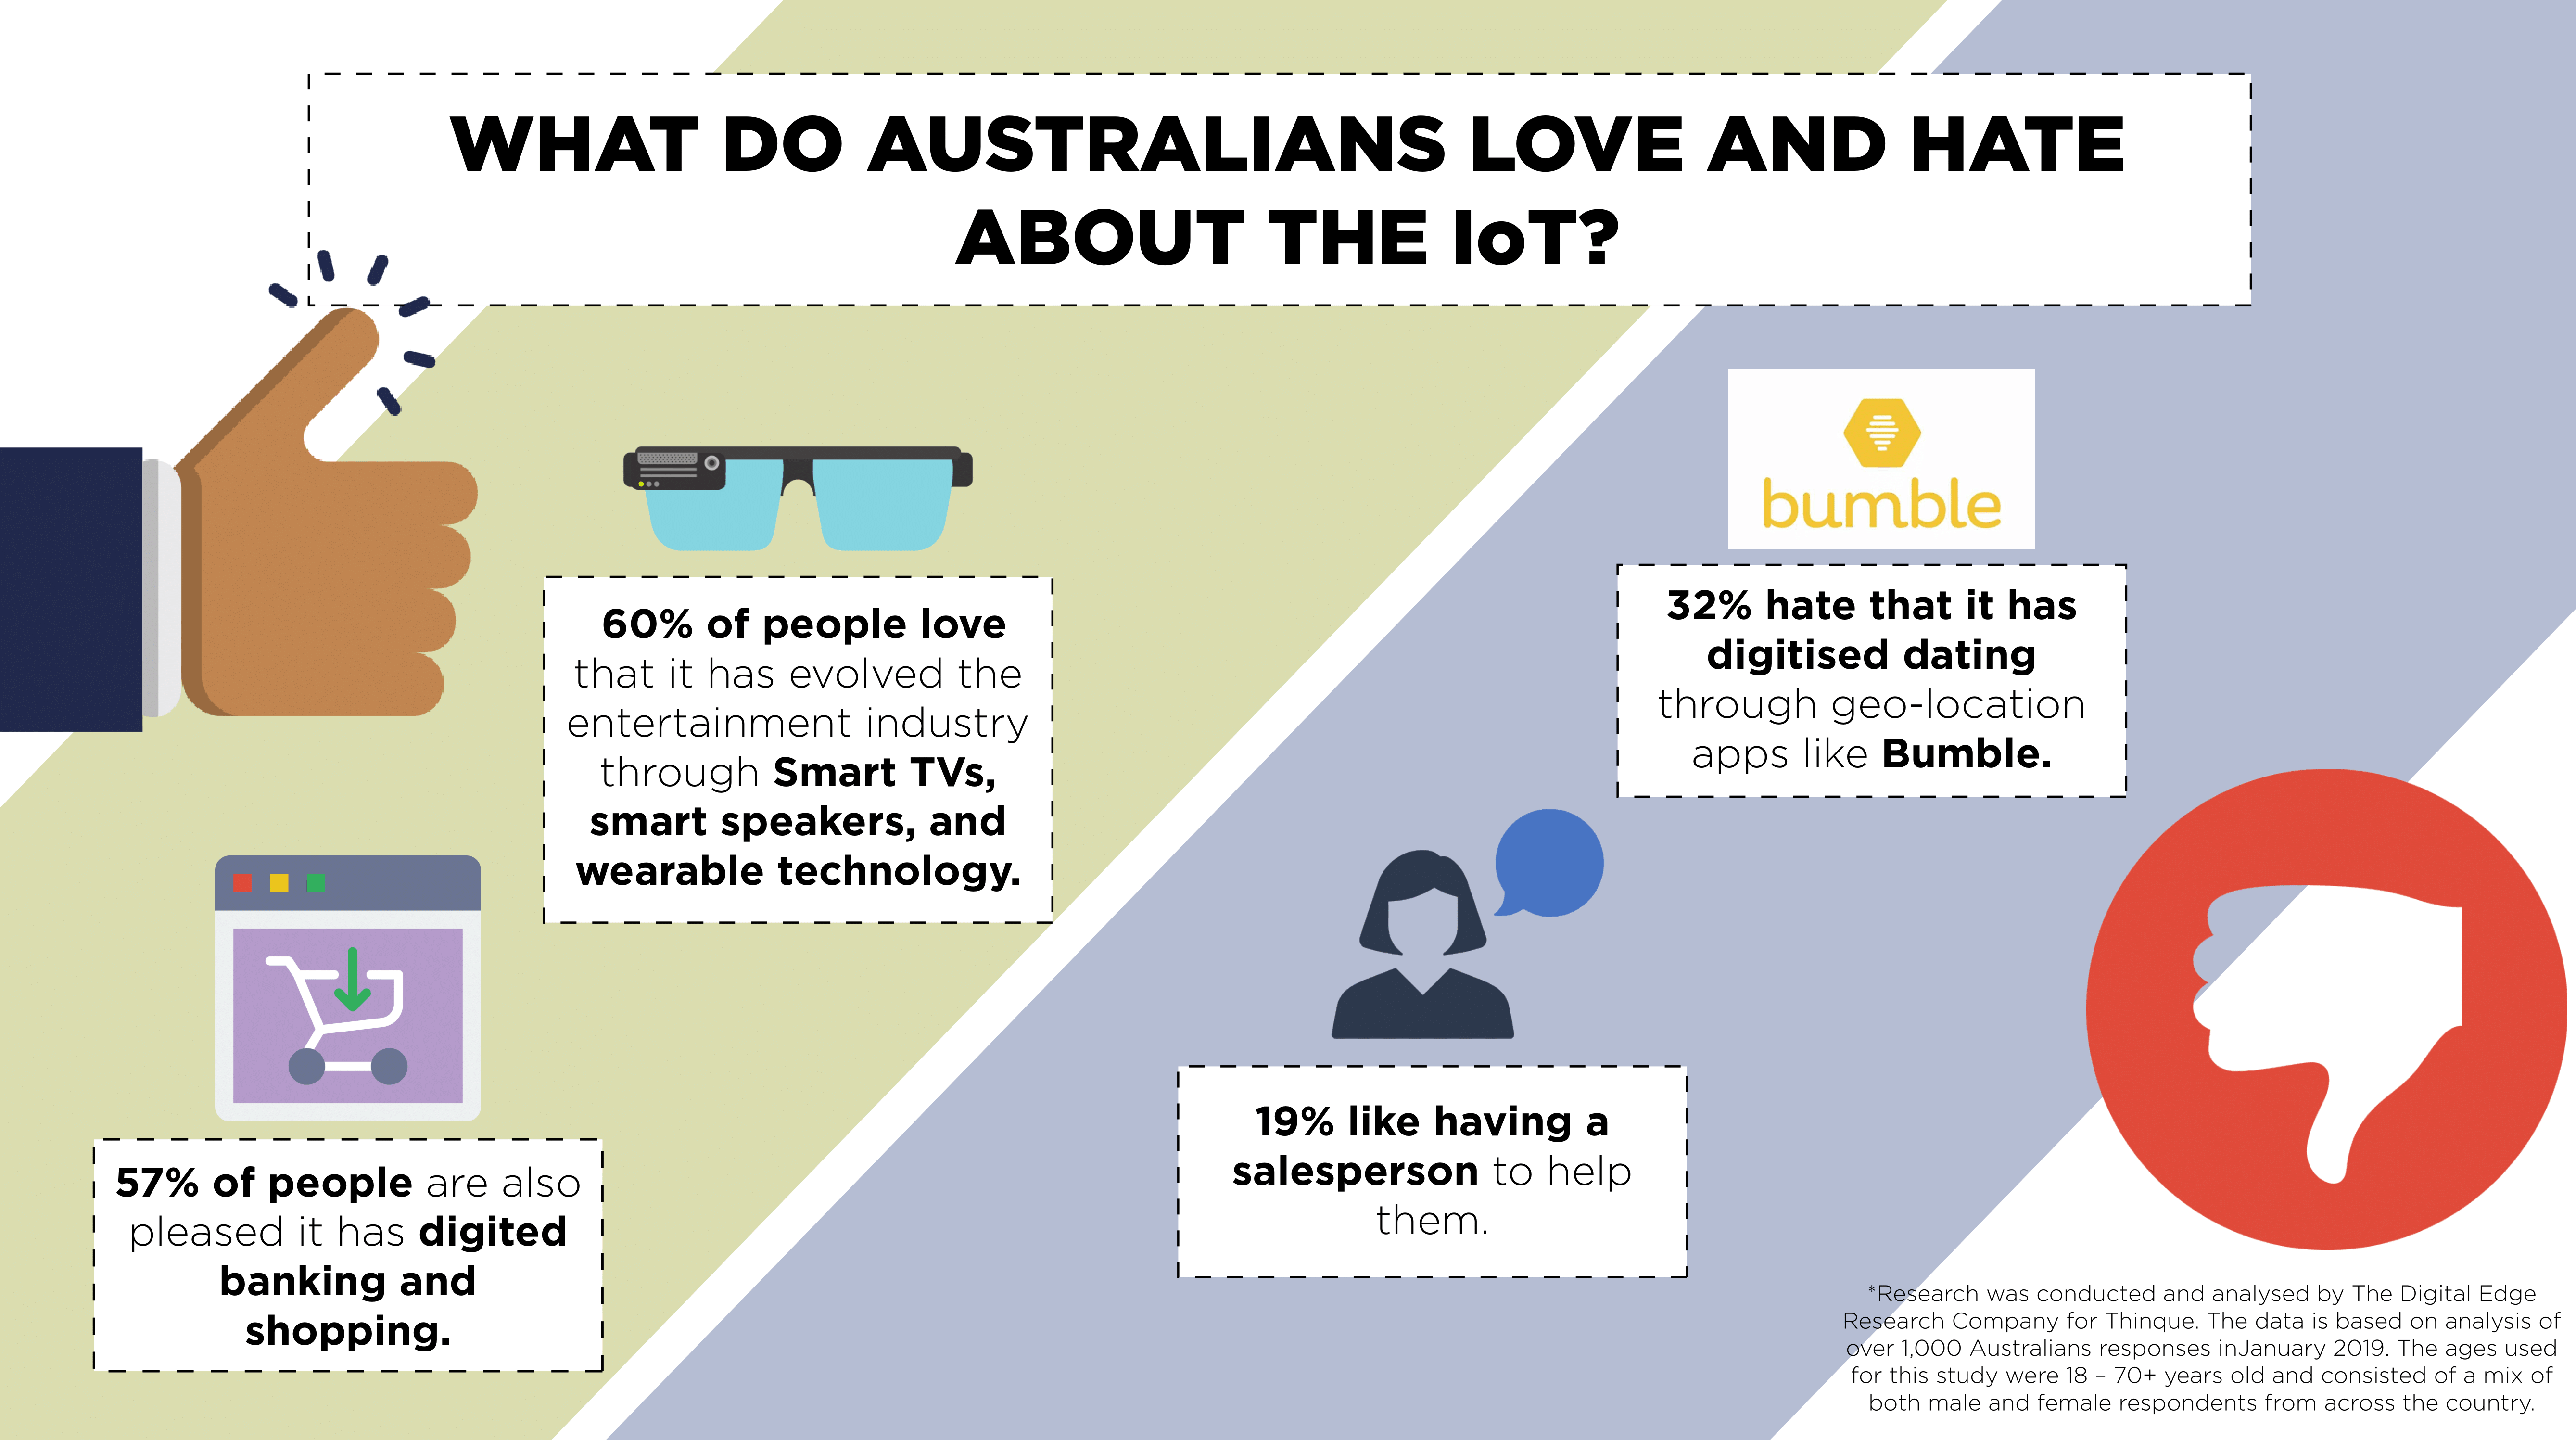 What do Australians love and hate about the IoT